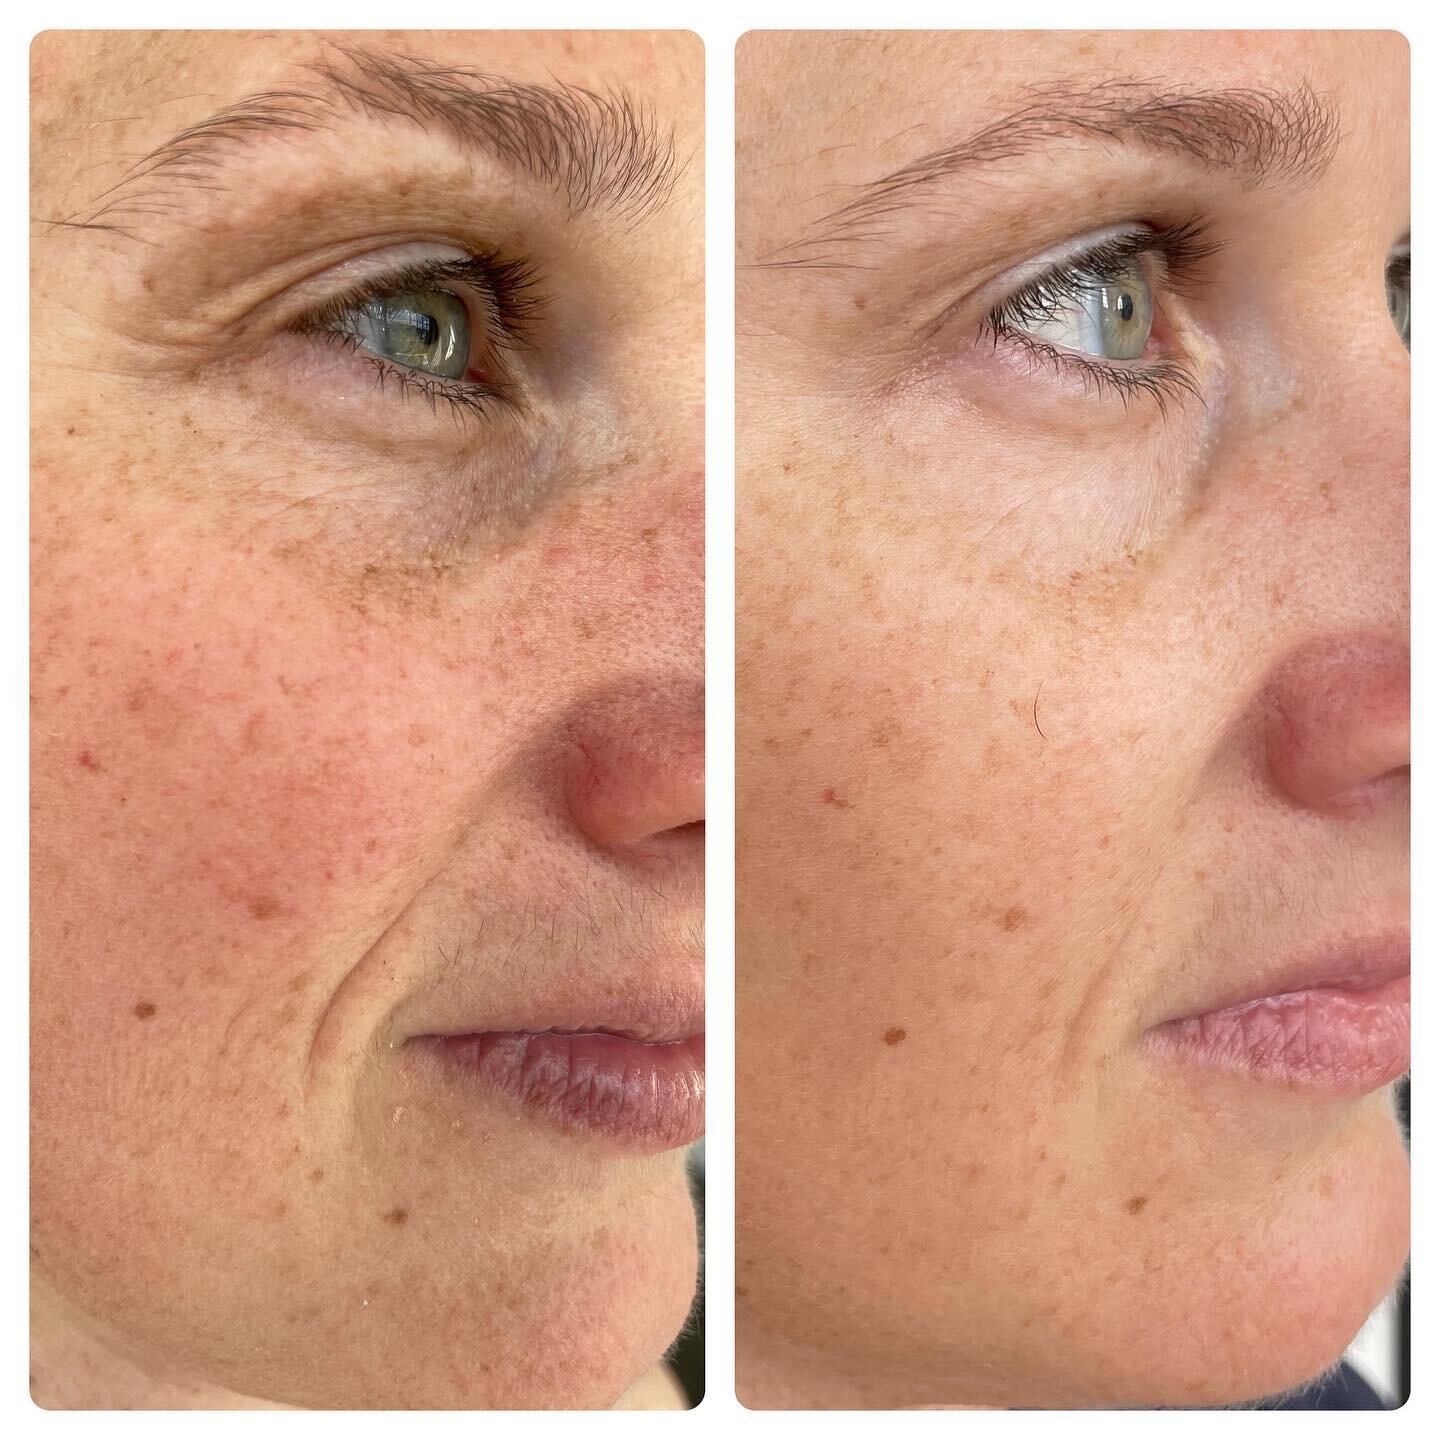 Four sessions of microneedling. By stimulating your body&rsquo;s own impressive wound healing mechanisms by way of thousands of tiny tiny pokes in the top layers of skin, a single session of microneedling increases collagen by 400-1000x!

All kinds o